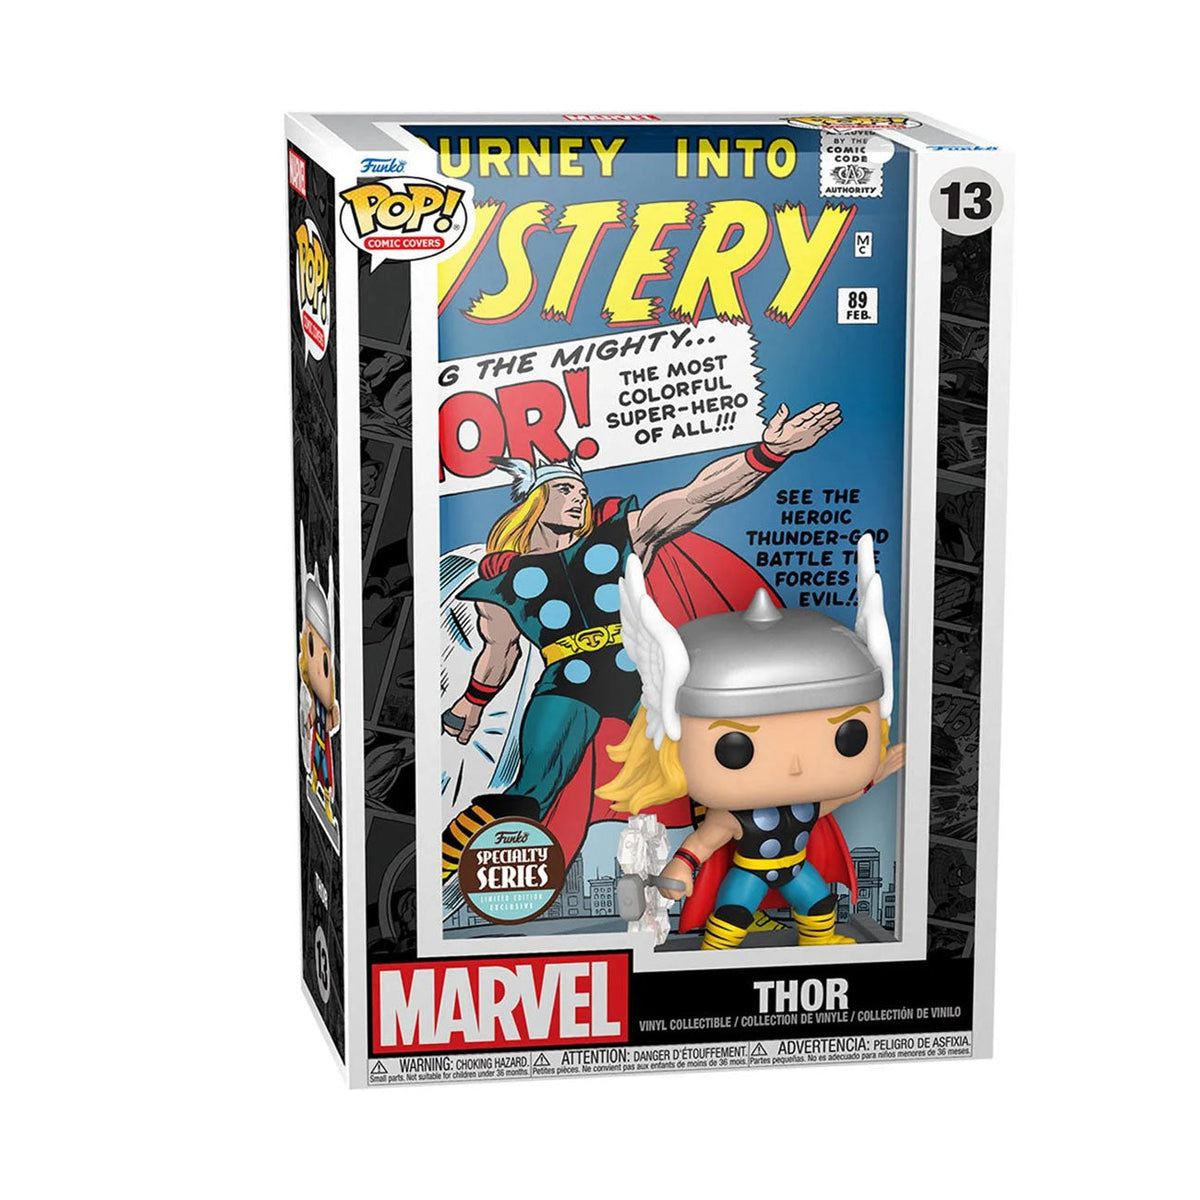 Becks stapel dwaas Classic Thor #13 Specialty Series Exclusive Marvel Funko POP! Comic Co